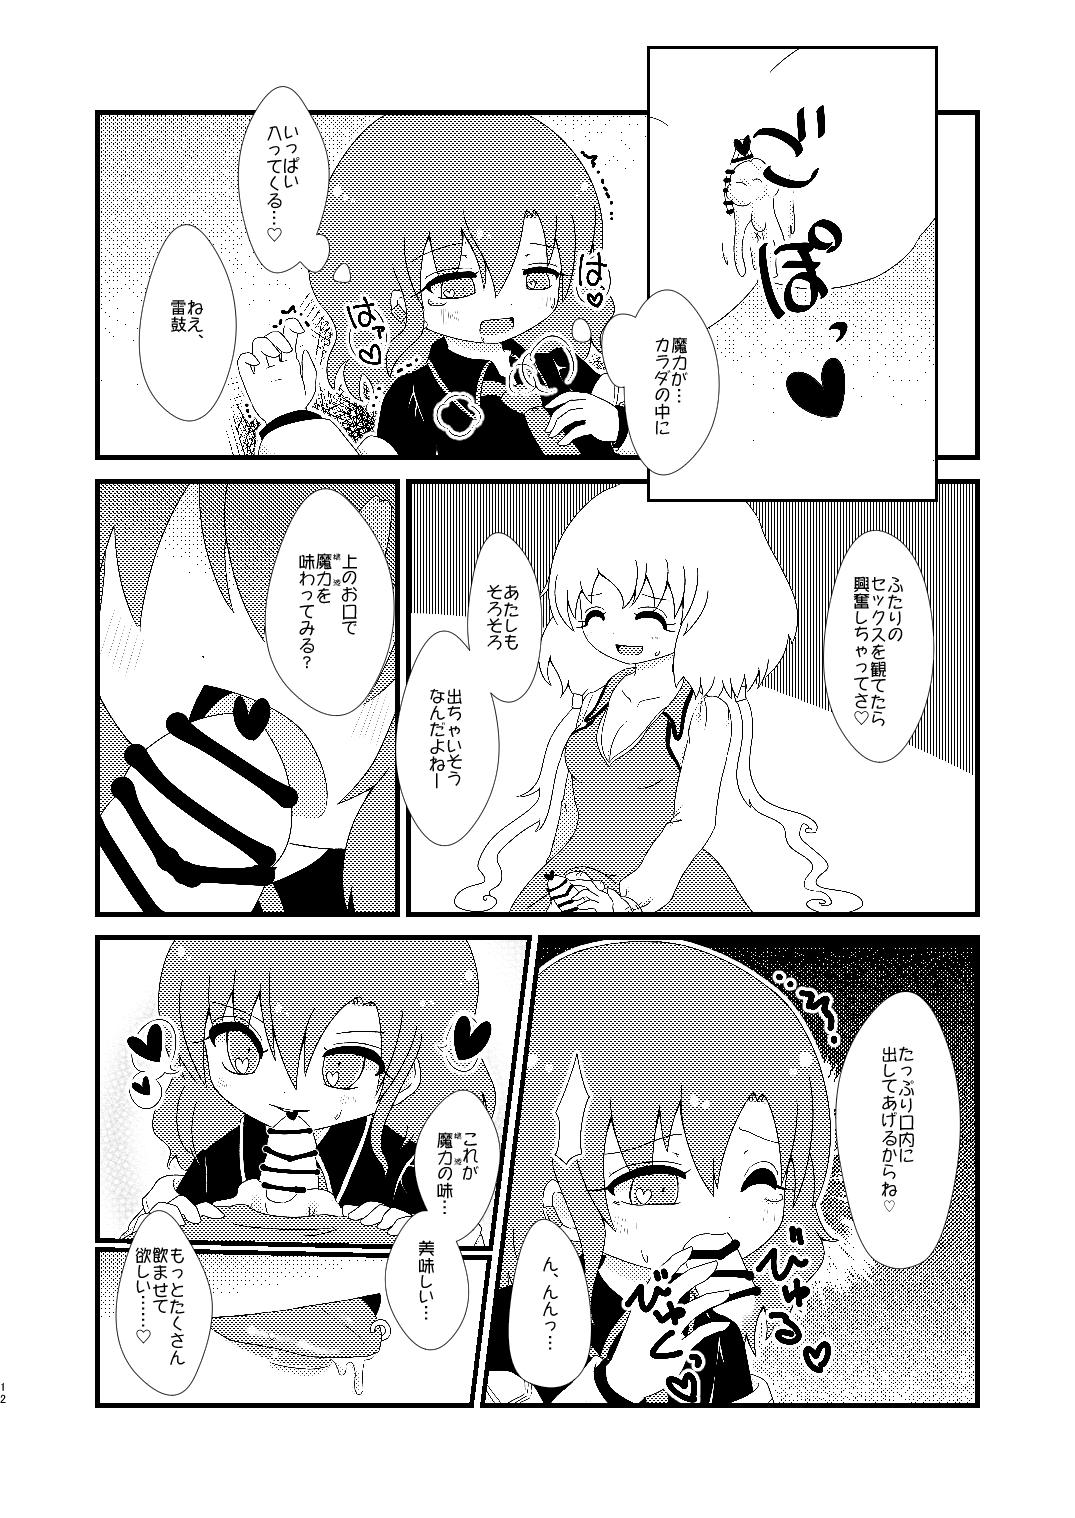 Teen 赤橙～sekitou～ - Touhou project 3some - Page 11